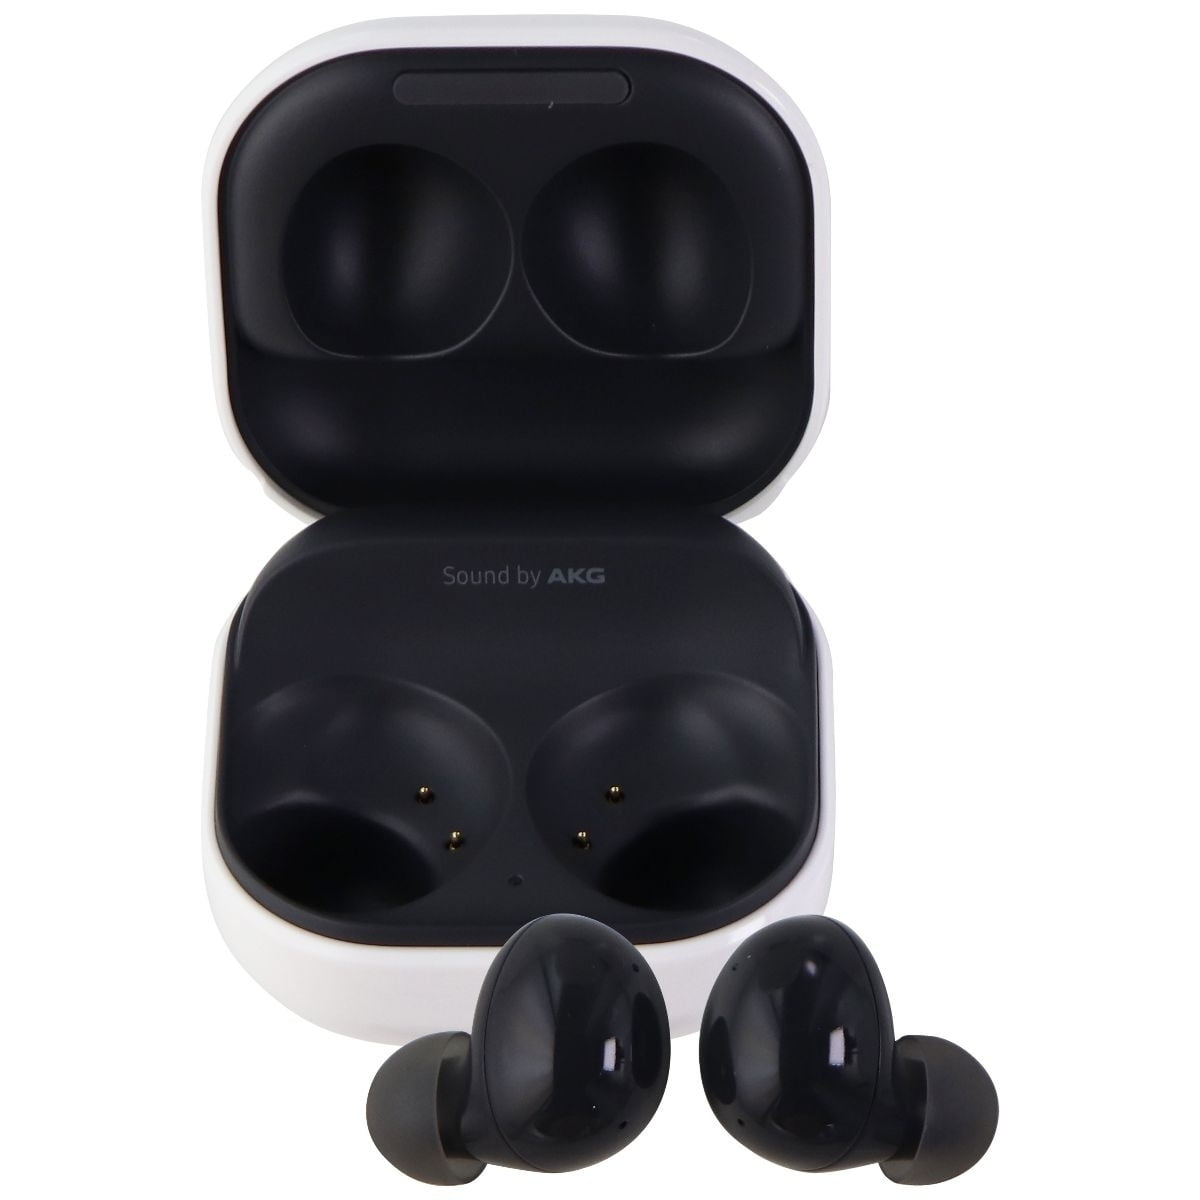  SAMSUNG Galaxy Buds 2 True Wireless Bluetooth Earbuds, Noise  Cancelling, Ambient Sound, Lightweight Comfort Fit In Ear, Auto Switch  Audio, Long Battery Life, Touch Control US Version, Graphite : Electronics